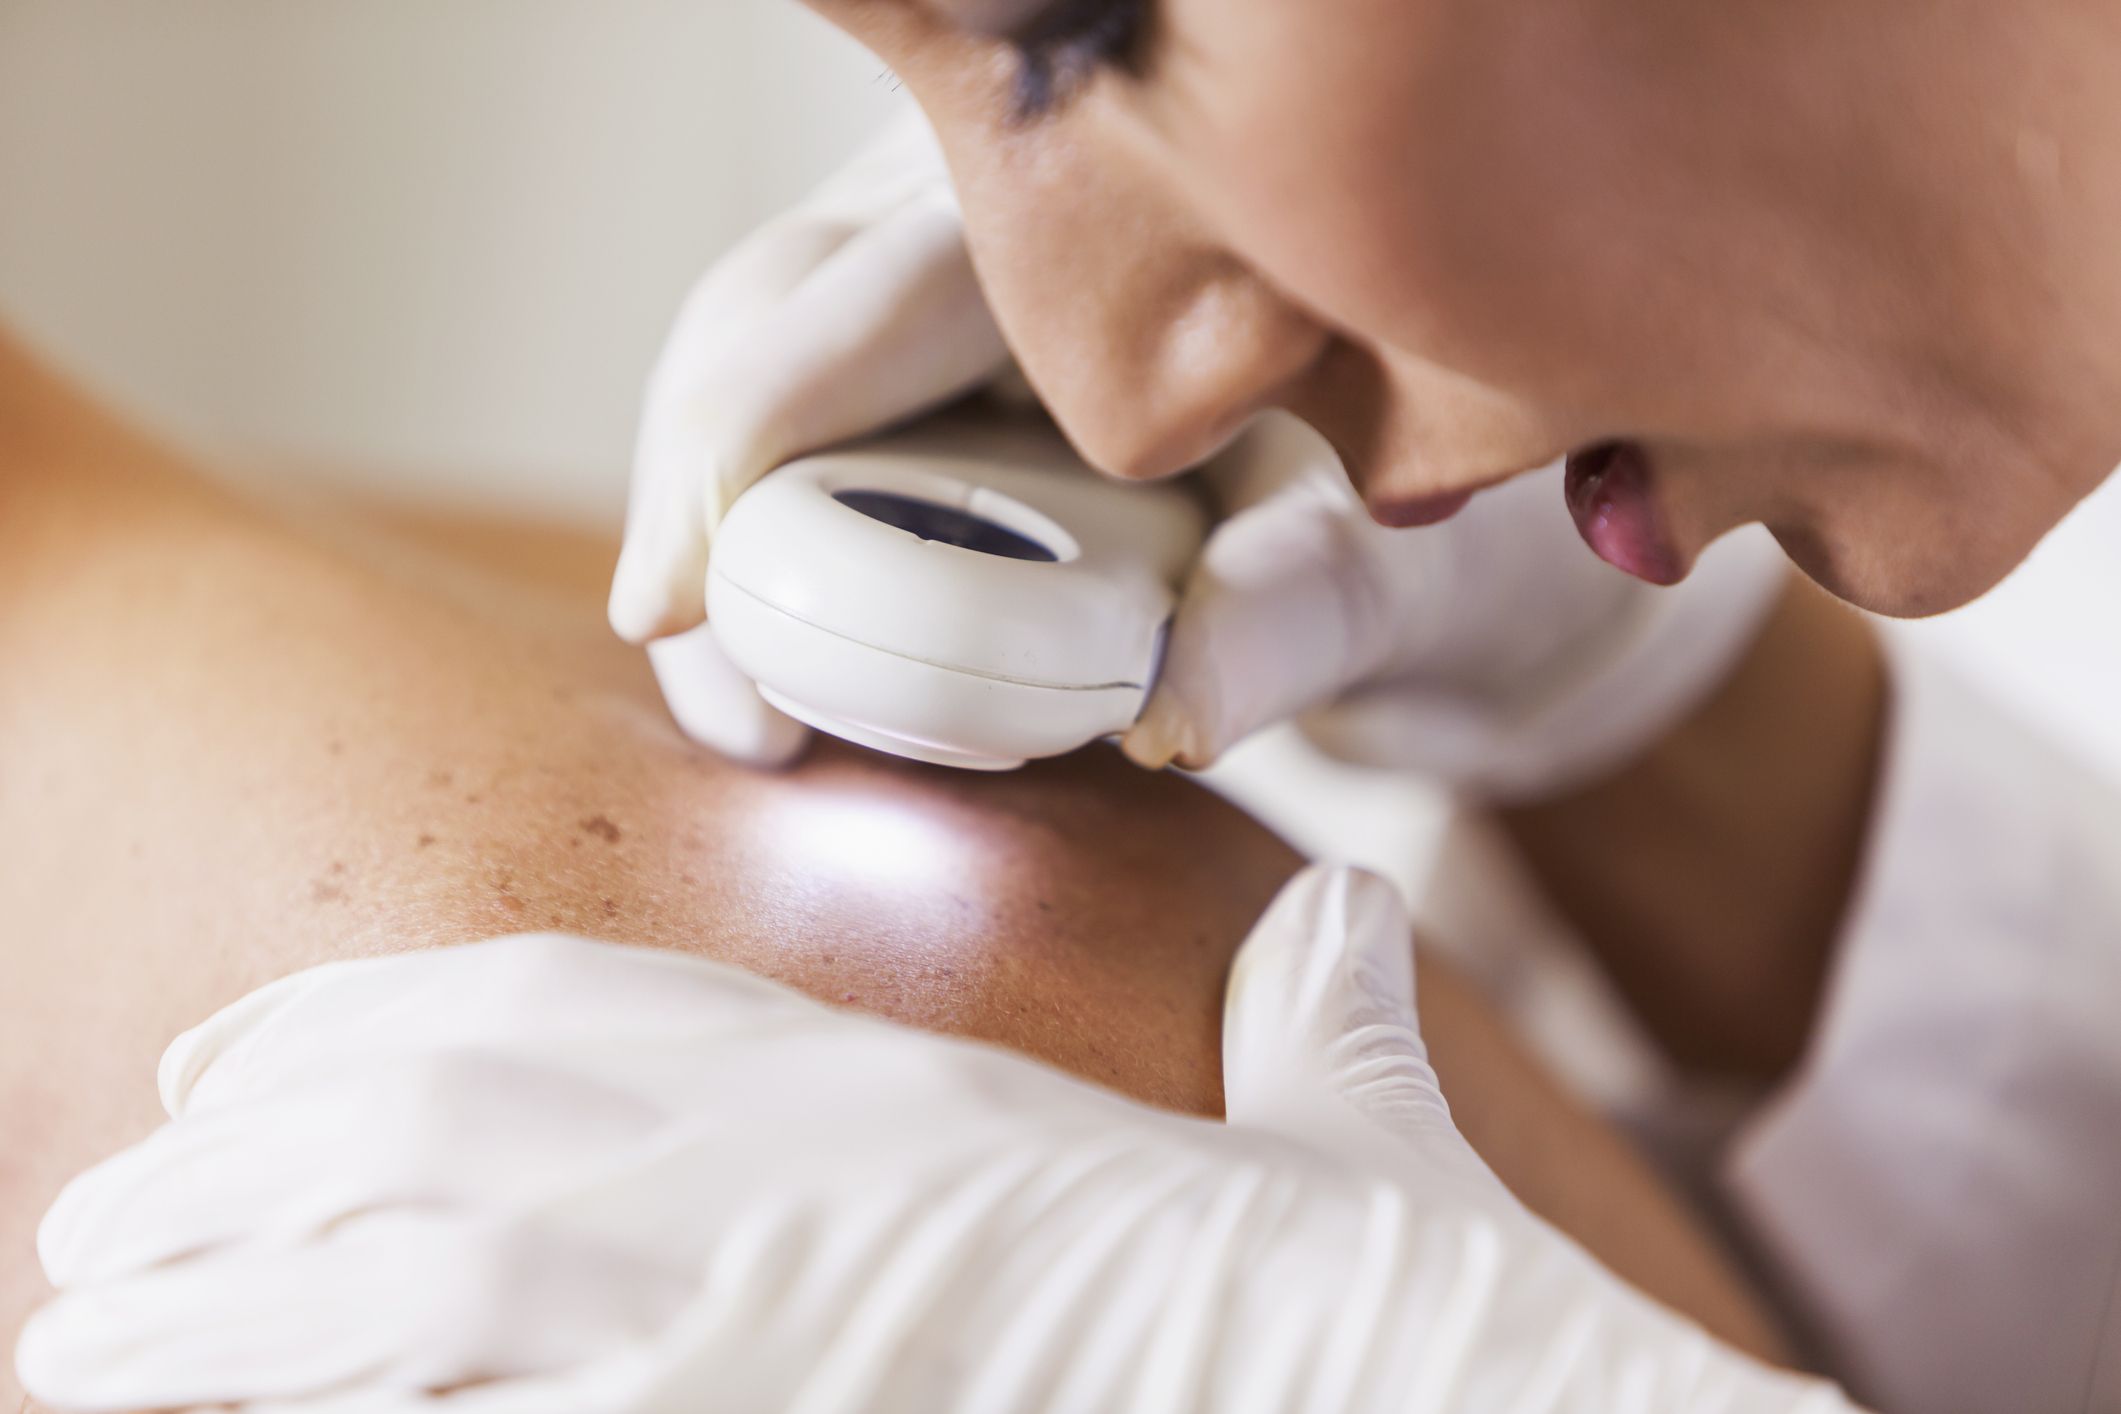 15 Career Tips from Dermatologists - How to Become a Derm